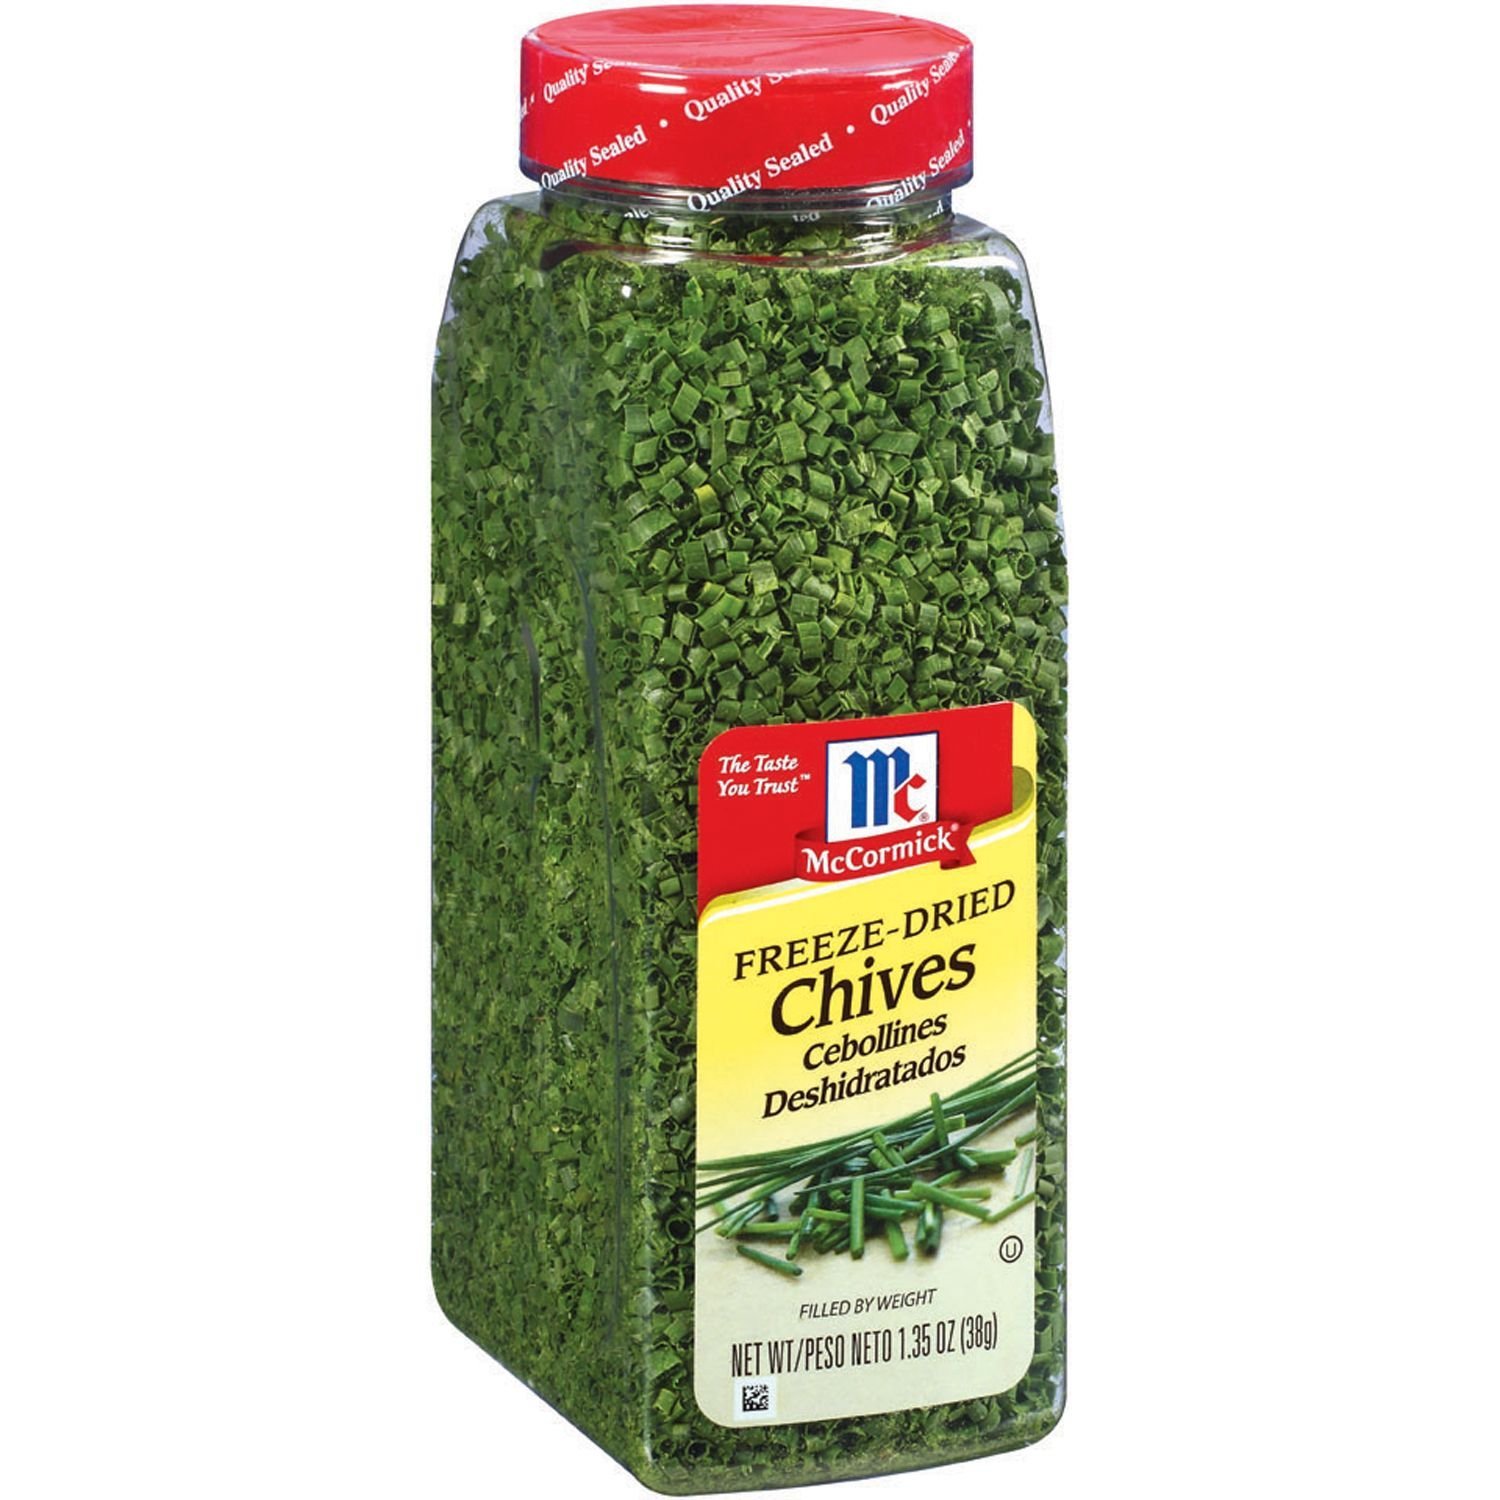 Amazon.com : McCormick Freeze Dried Chives (1.35 oz) : Grocery ...